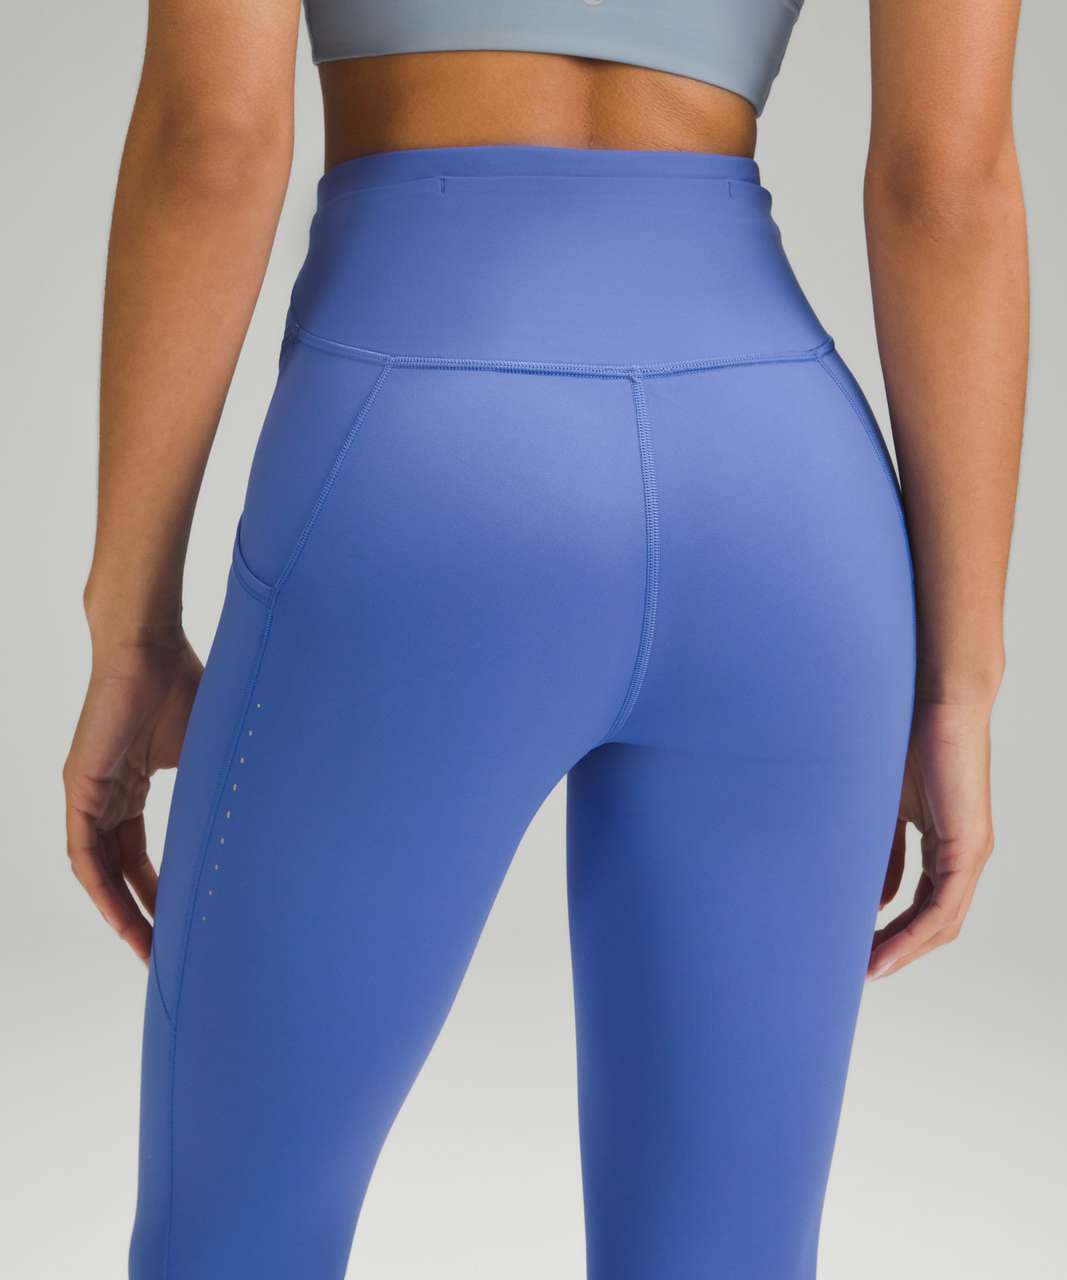 Lululemon Fast and Free Reflective High-Rise Tight 25 Size 6